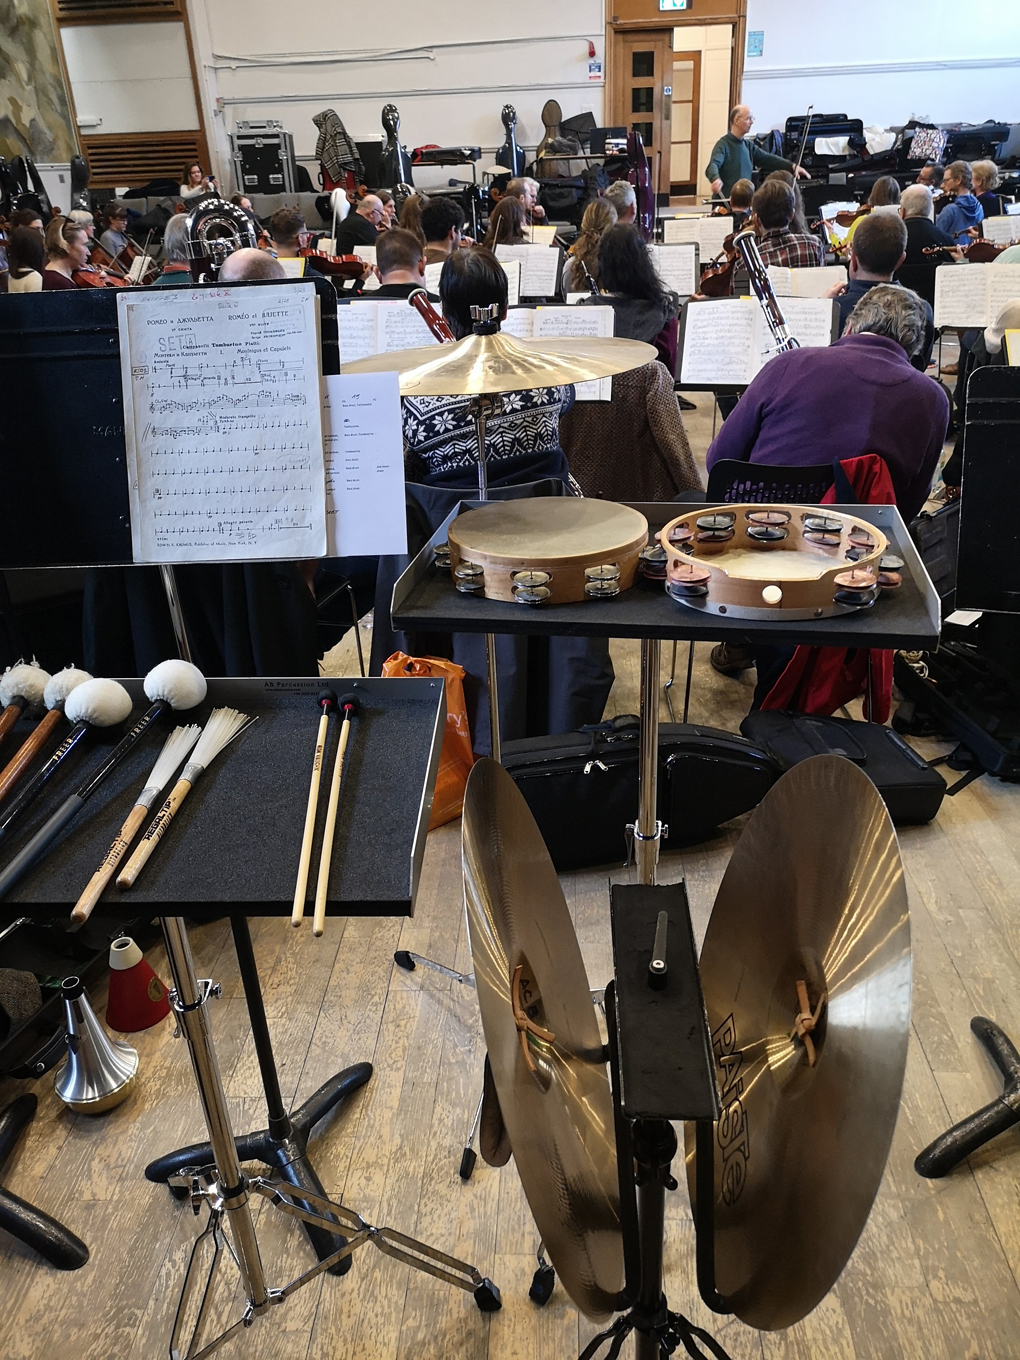 A view from the back of the orchestra showing cymbals and music stands.